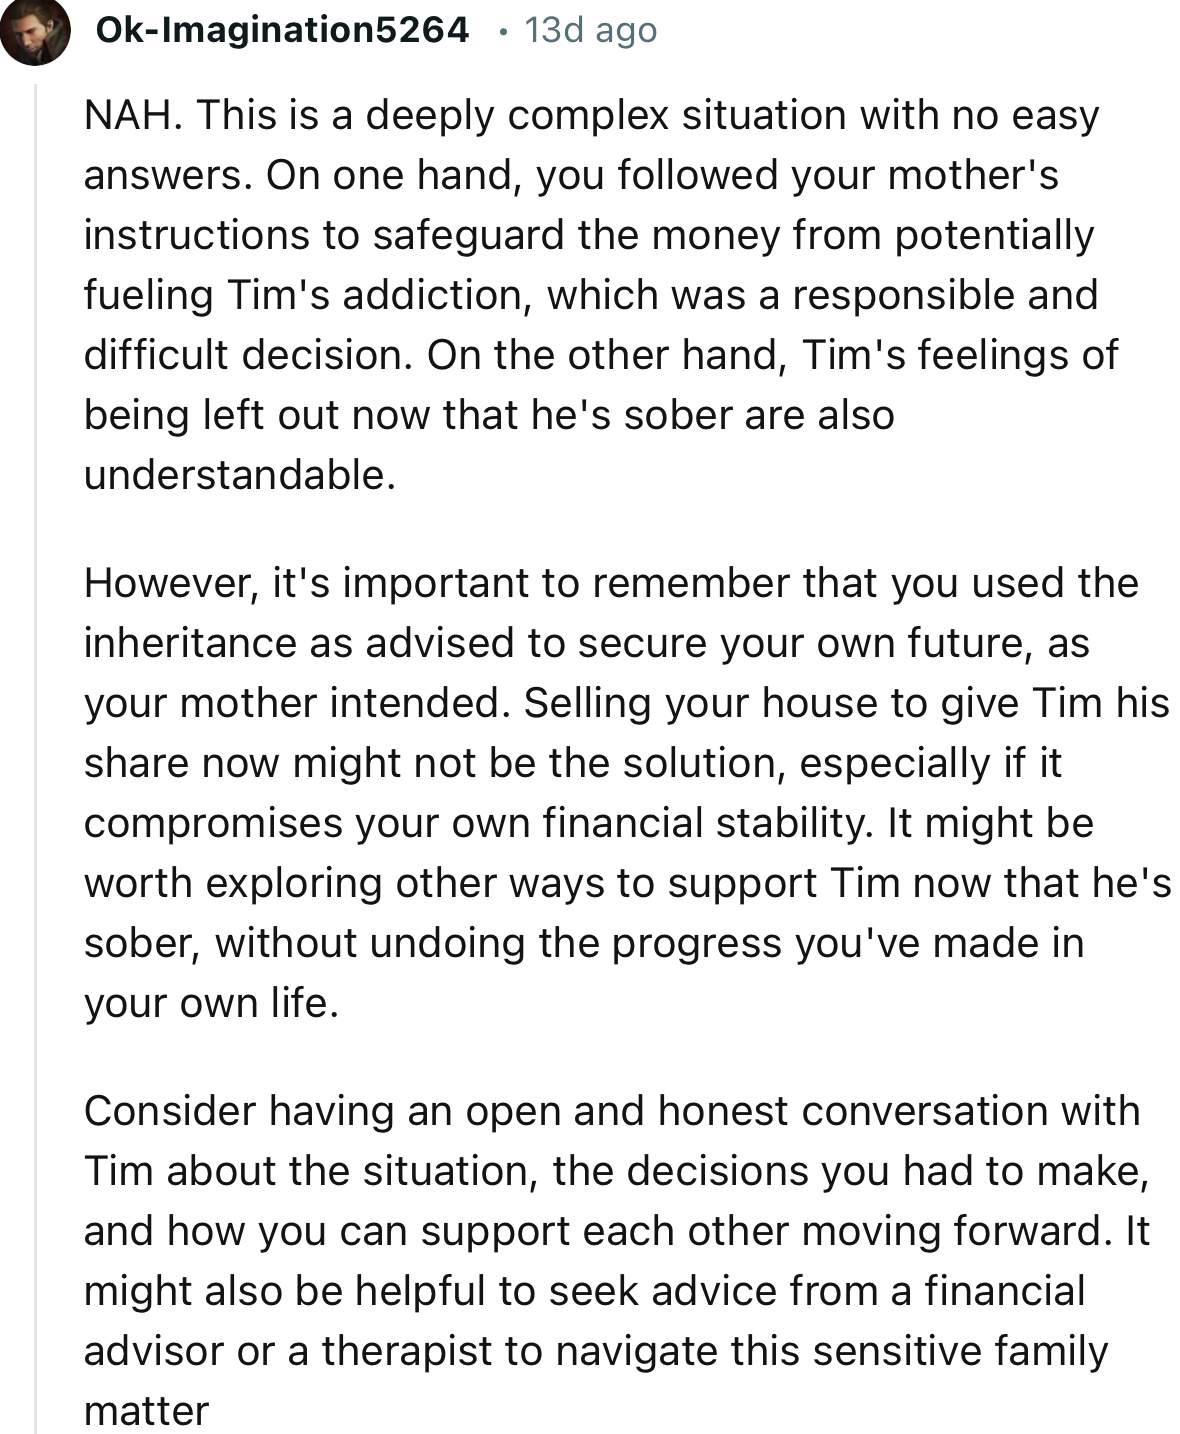 “Consider having an open and honest conversation with Tim about the situation, the decisions you had to make, and how you can support each other moving forward.”